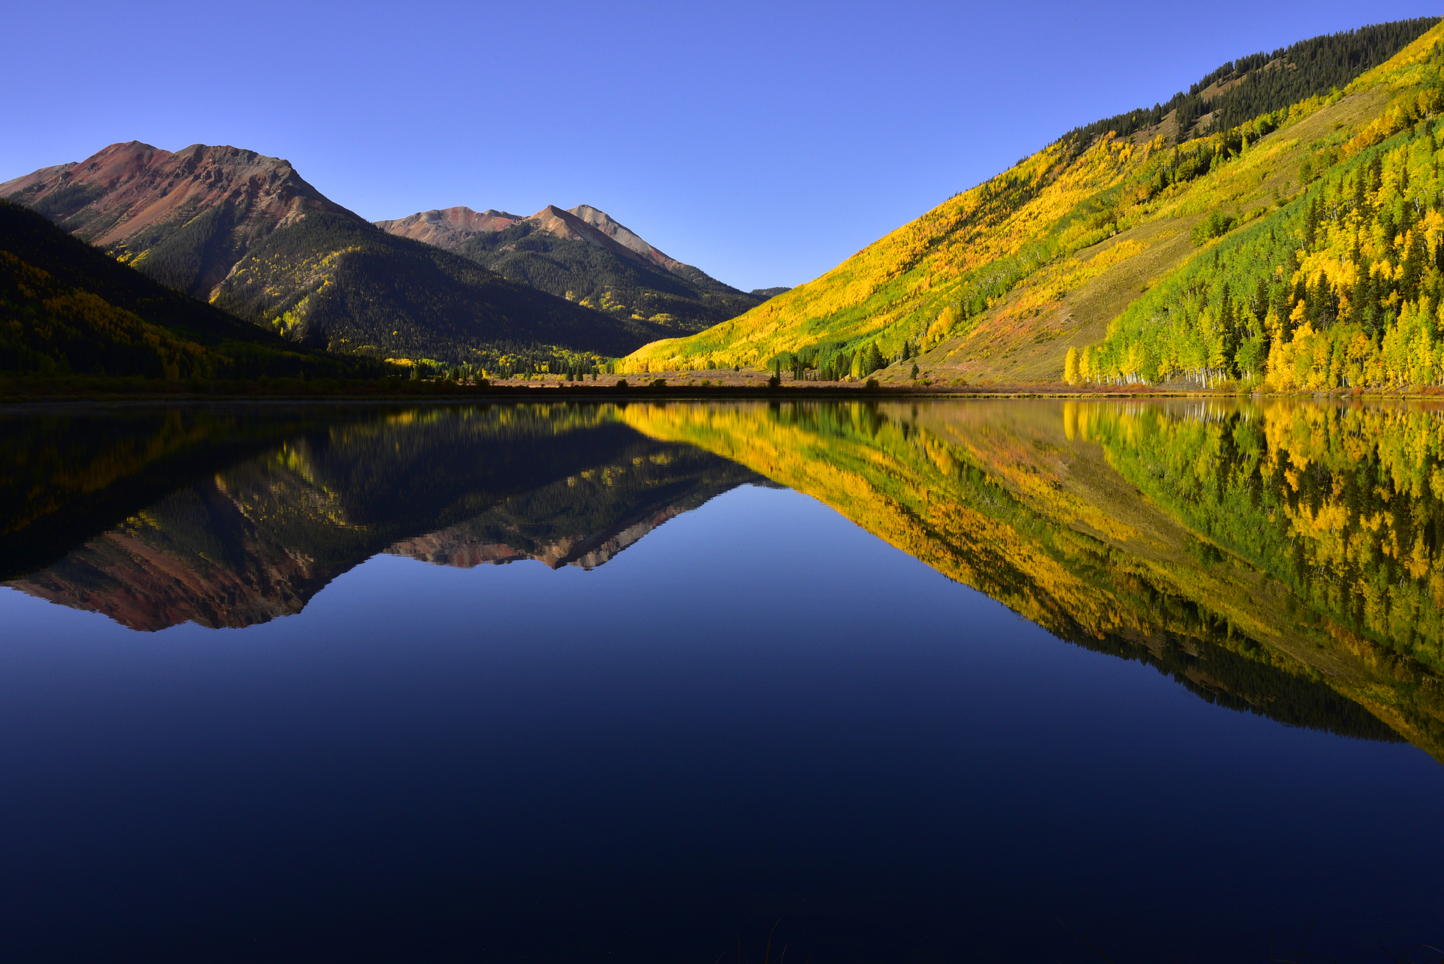 Red Mountains (left, center), fall colors on Hayden Mountain (right), reflection in Crystal Lake  -  Uncompahgre National Forest, Colorado